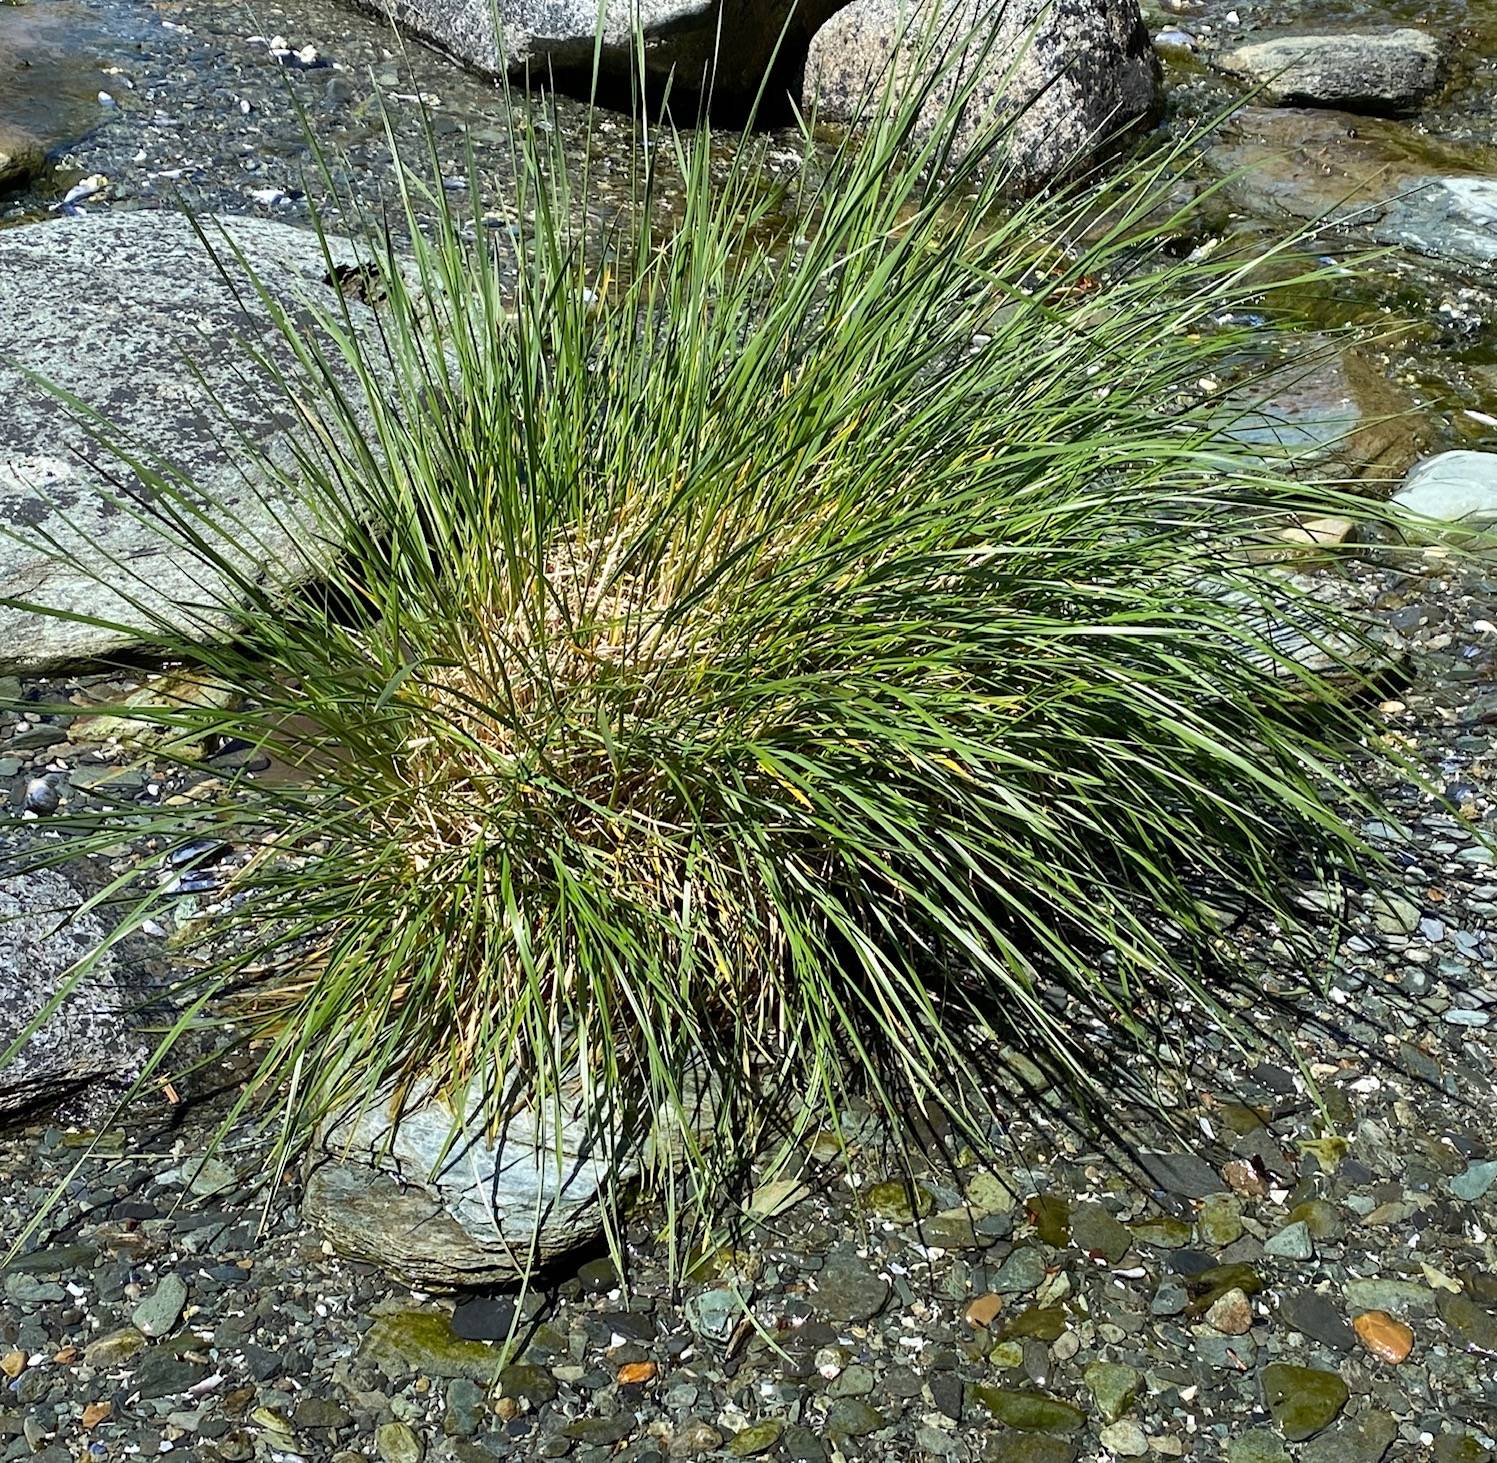 This beach grass seen June 12 on Dupont Beach resembles a colorful porcupine, according to Denise Carroll. (Courtesy Photo | Denise Carroll)